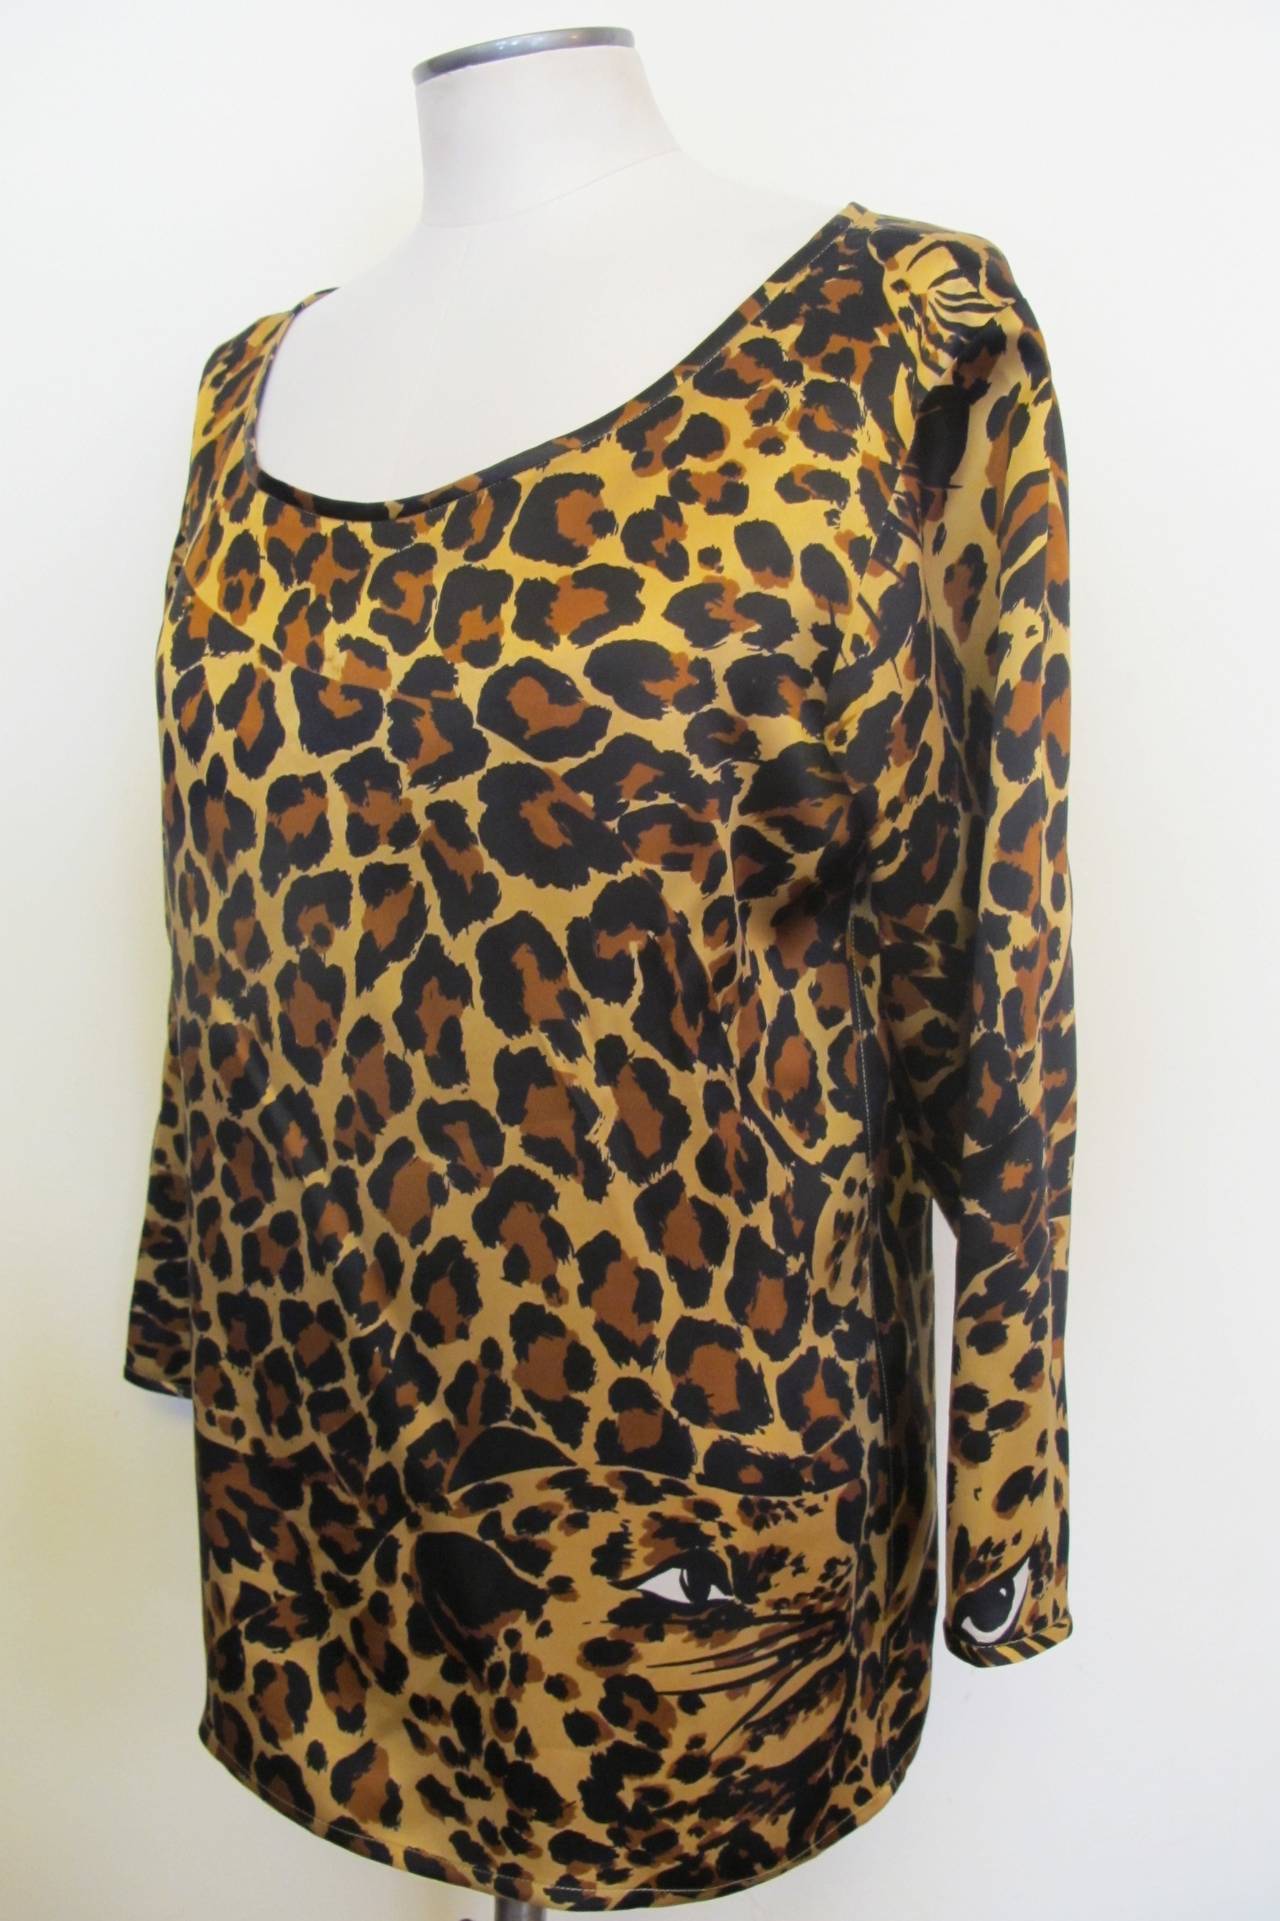 Iconic Saint Laurent Rive Gauche lower scooped neck blouse created from Saint Laurent's leopard silk. It is so chic, when on the body. Size Medium to Large. Sleeve length measures 19.25 inches. Shoulder to shoulder measures 16 inches.